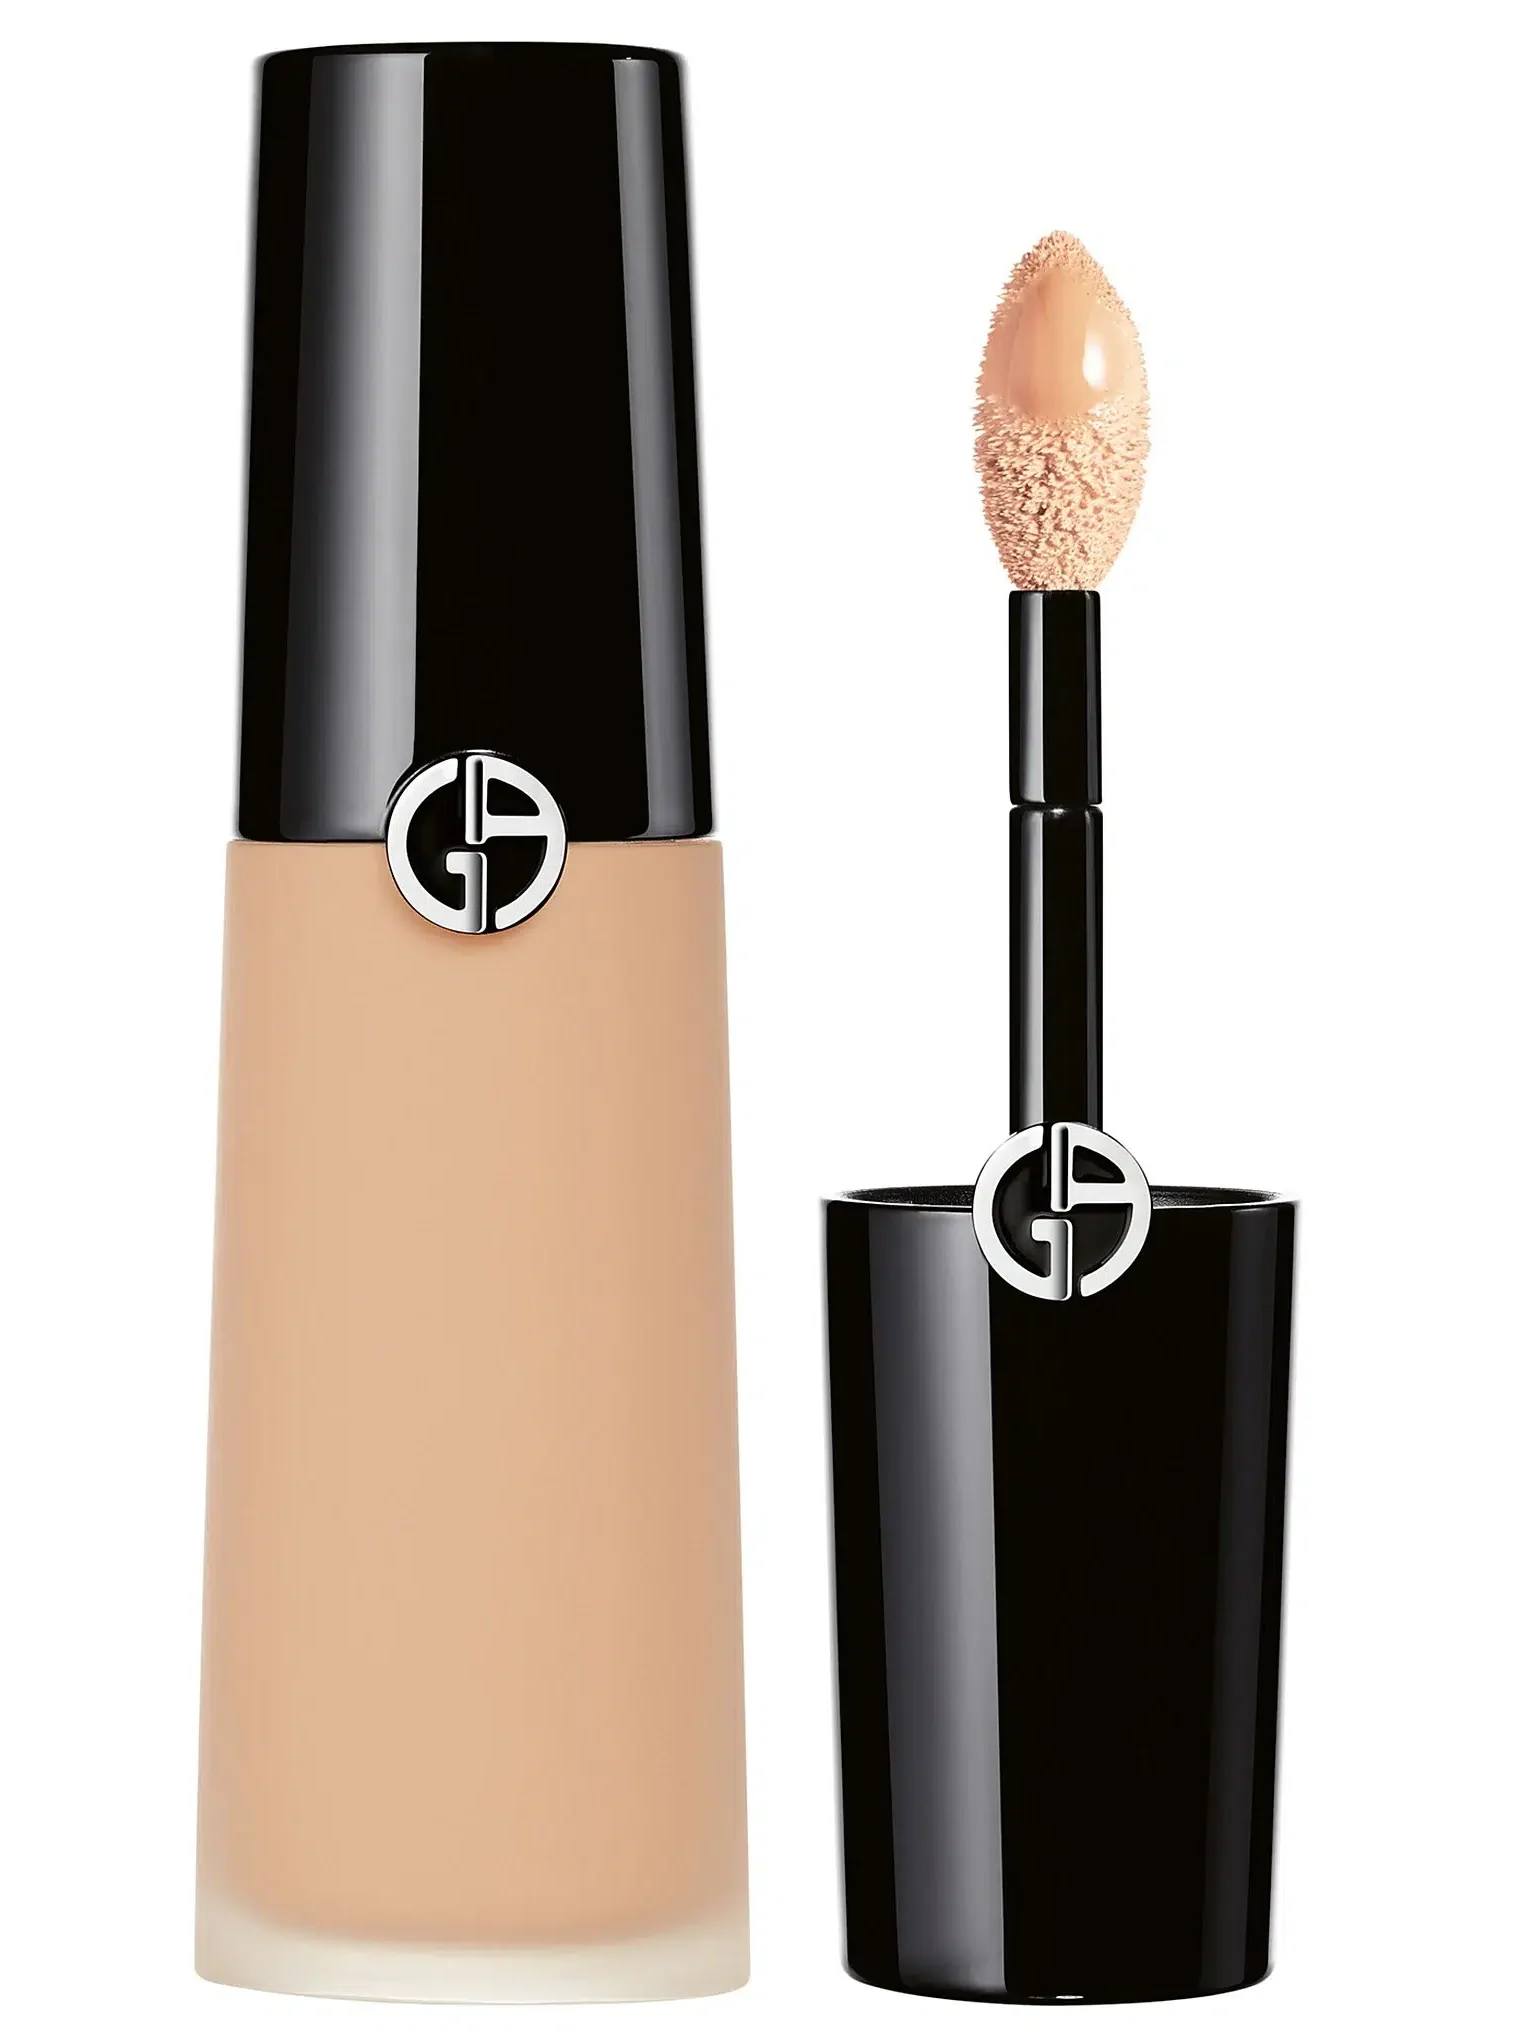 10. Armani Beauty Luminous Silk Face and Under-Eye Concealer